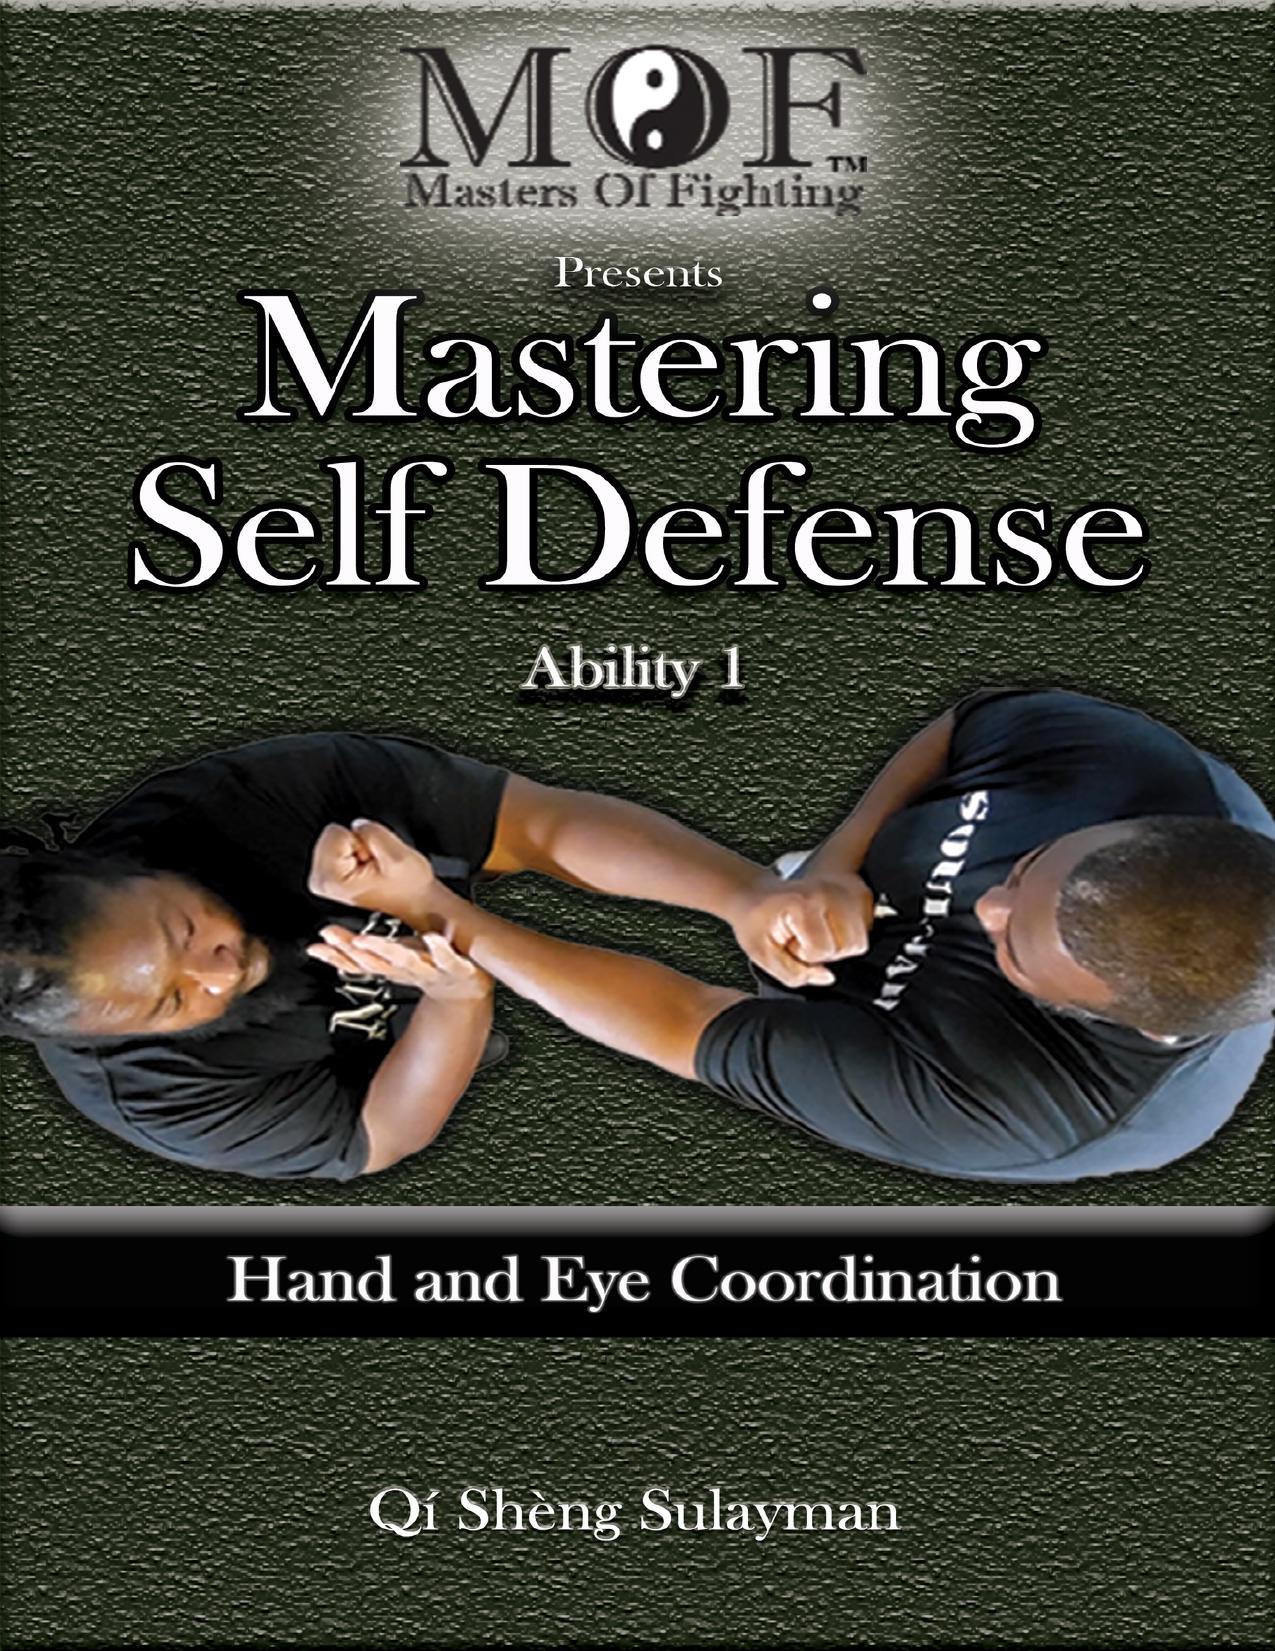 Mastering Self Defense : Ability 1 Hand and Eye Coordination by Sulayman Qi Sheng